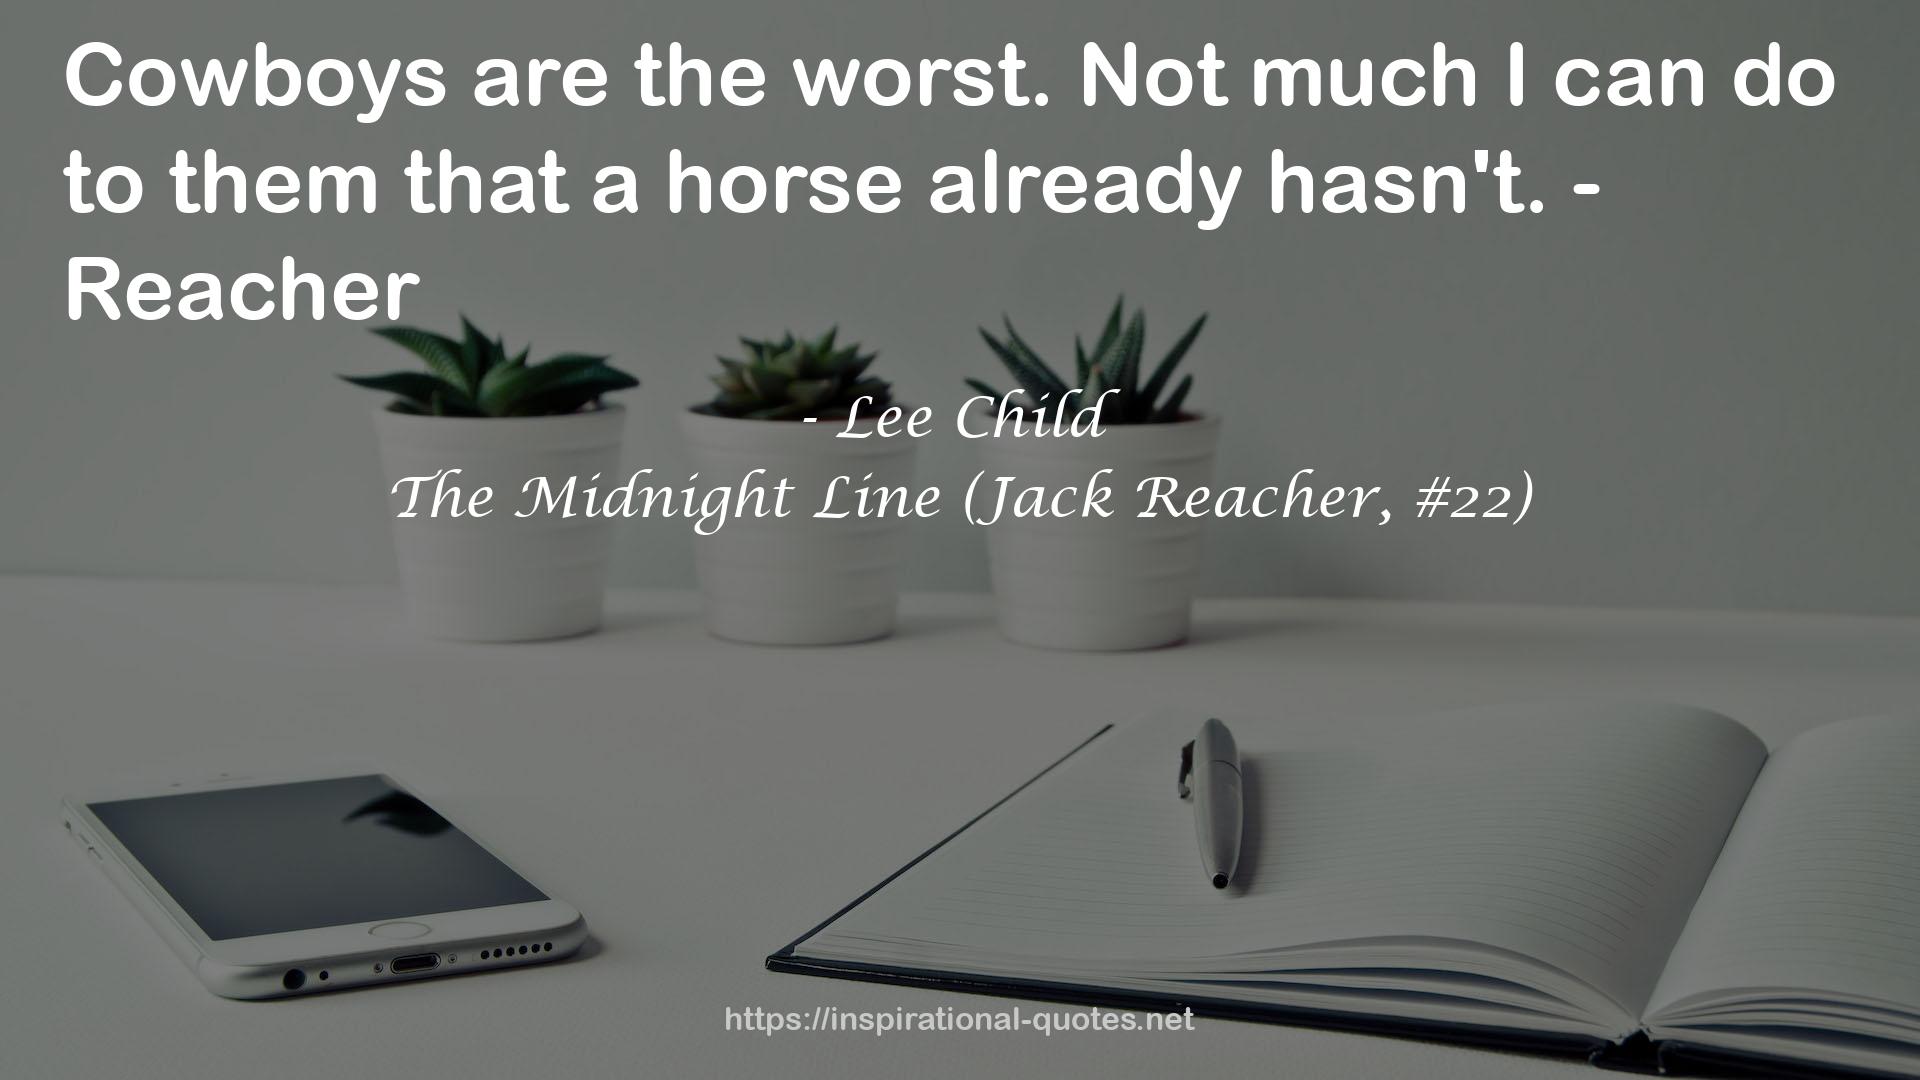 The Midnight Line (Jack Reacher, #22) QUOTES